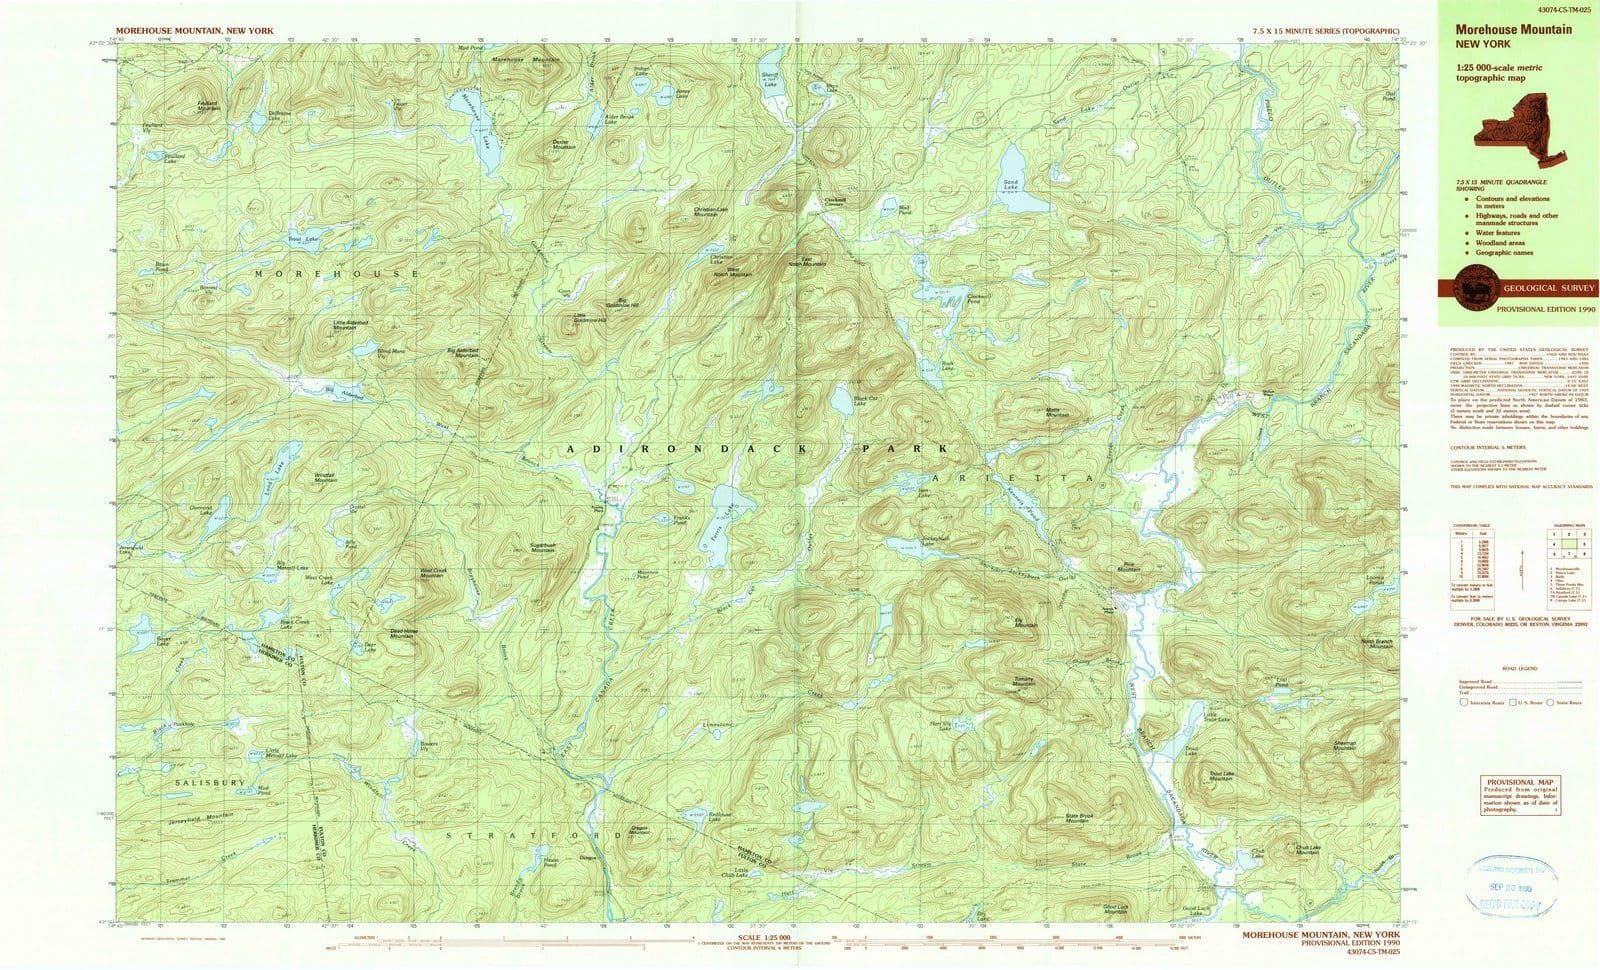 1990 Morehouse Mountain, NY - New York - USGS Topographic Map